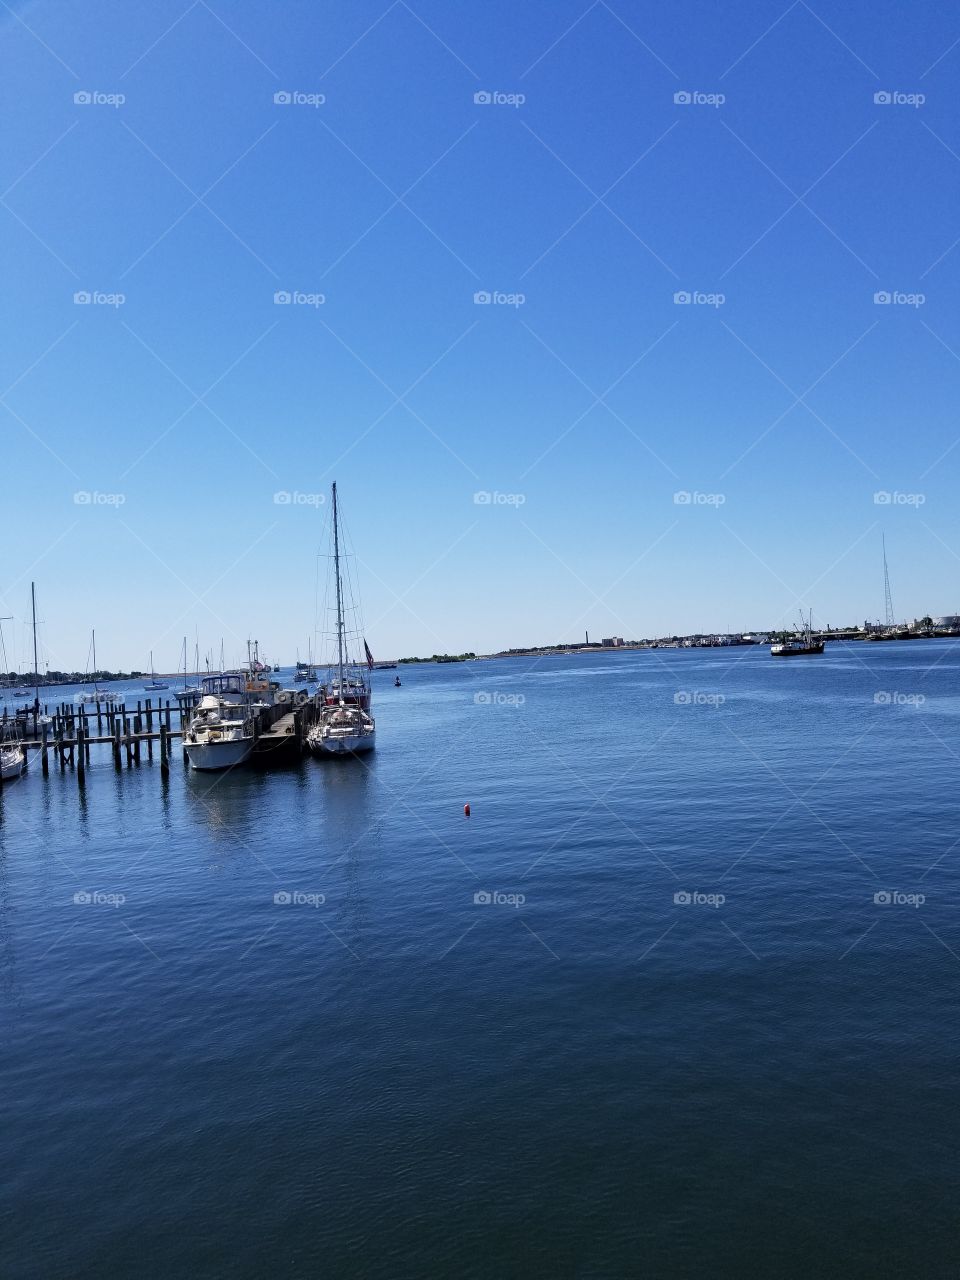 Popes Island Fairhaven Massachusetts a view of the water